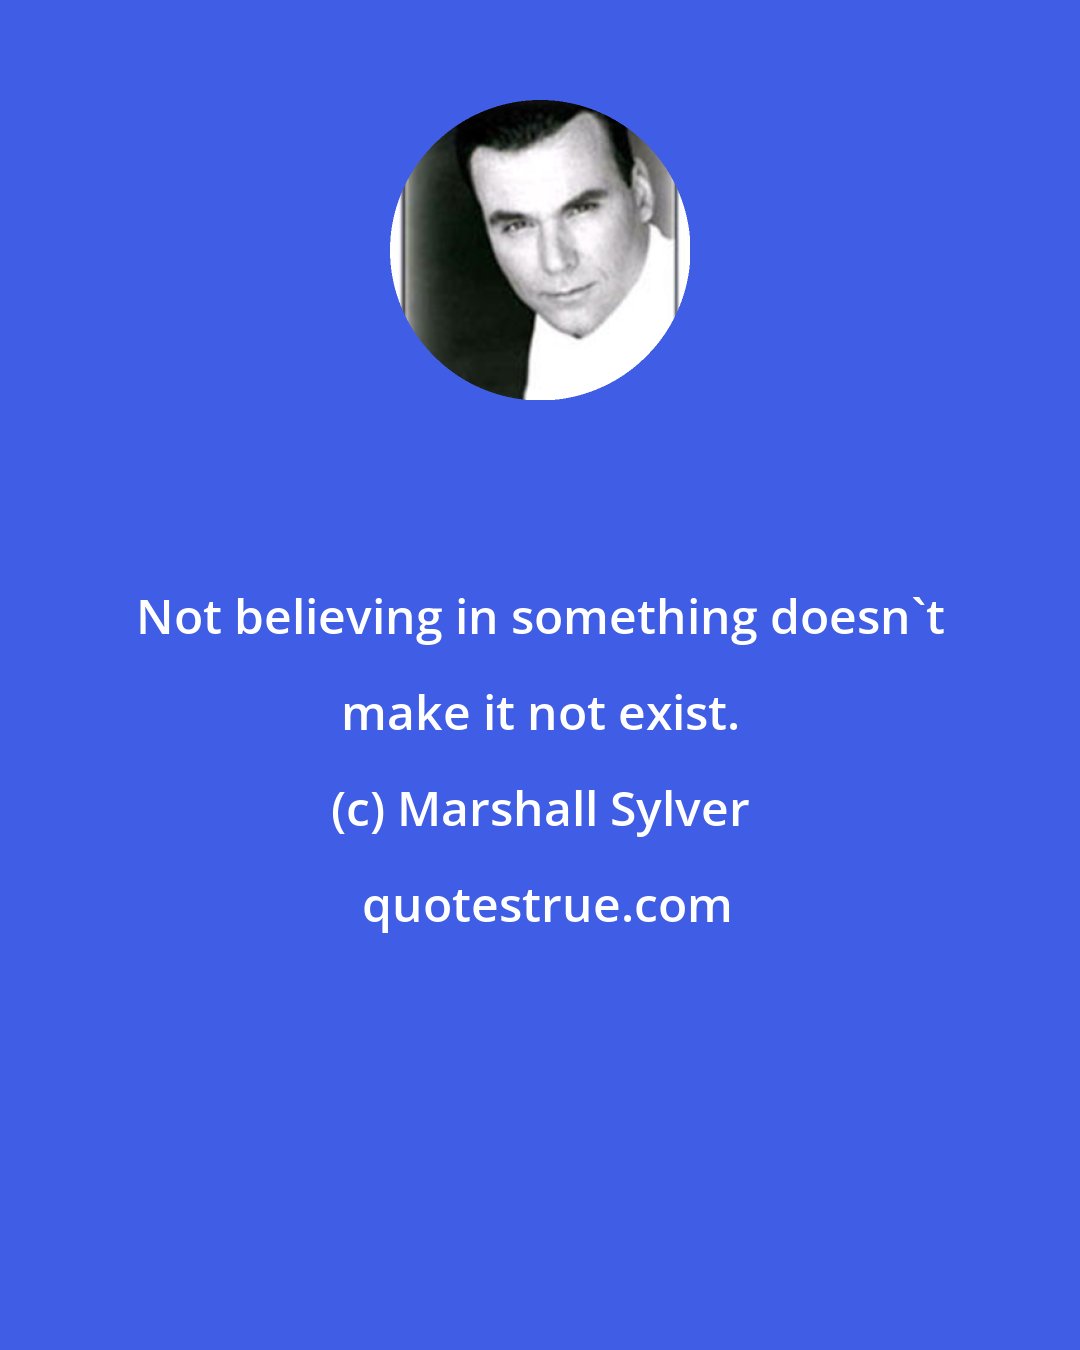 Marshall Sylver: Not believing in something doesn't make it not exist.